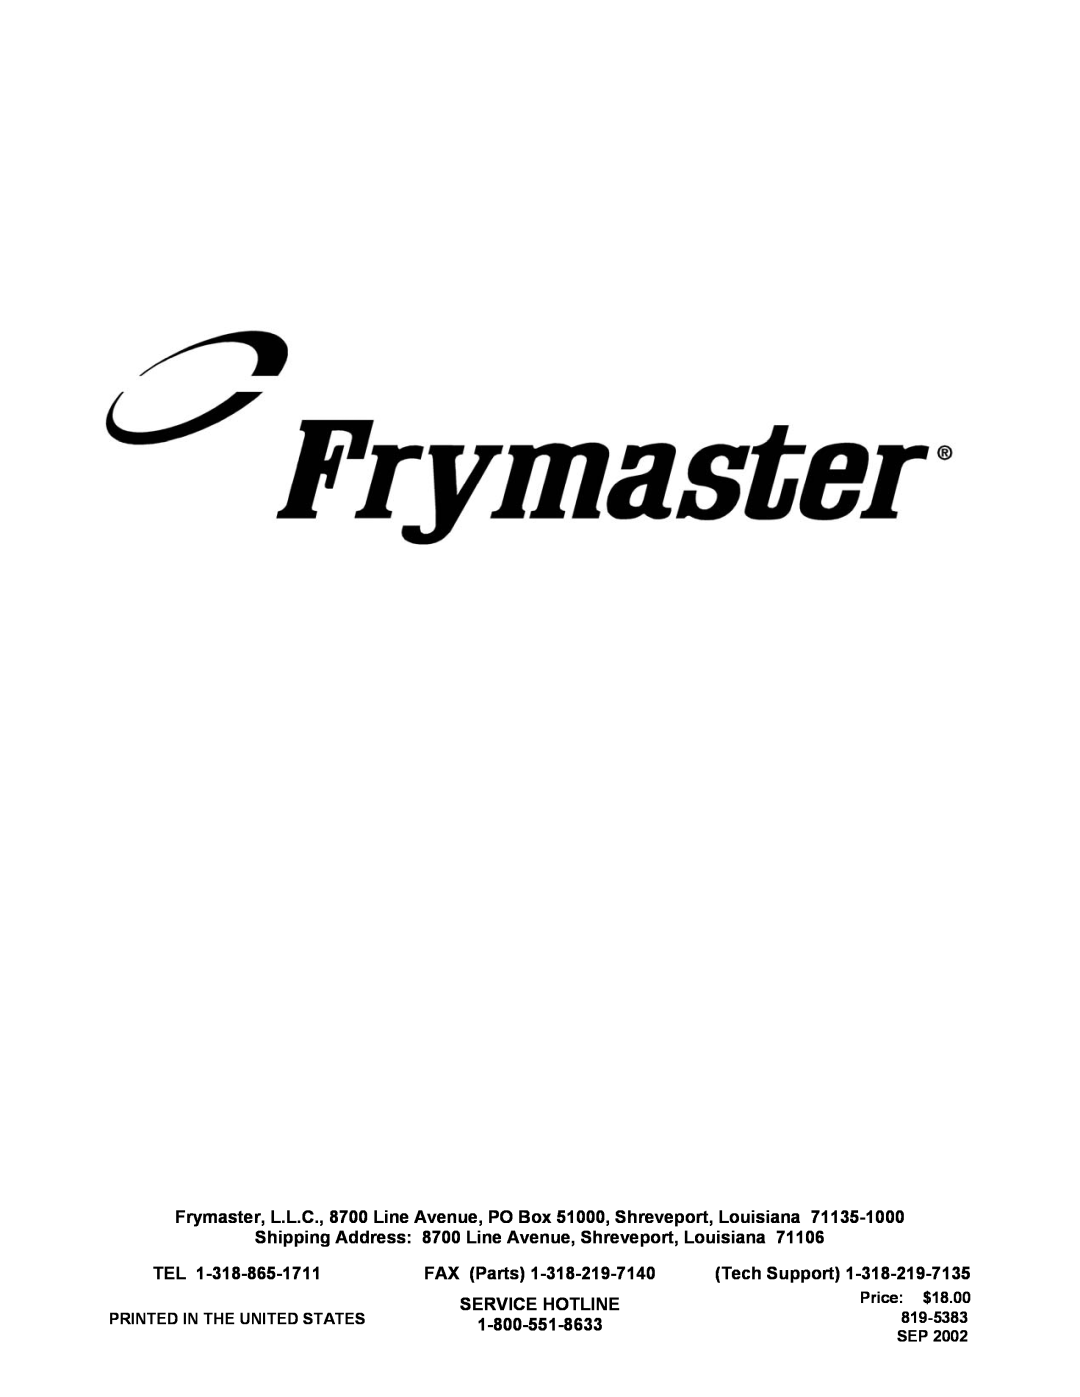 Frymaster 47 Series operation manual FAX Parts, Tech Support, Service Hotline, Price $18.00, 819-5383 